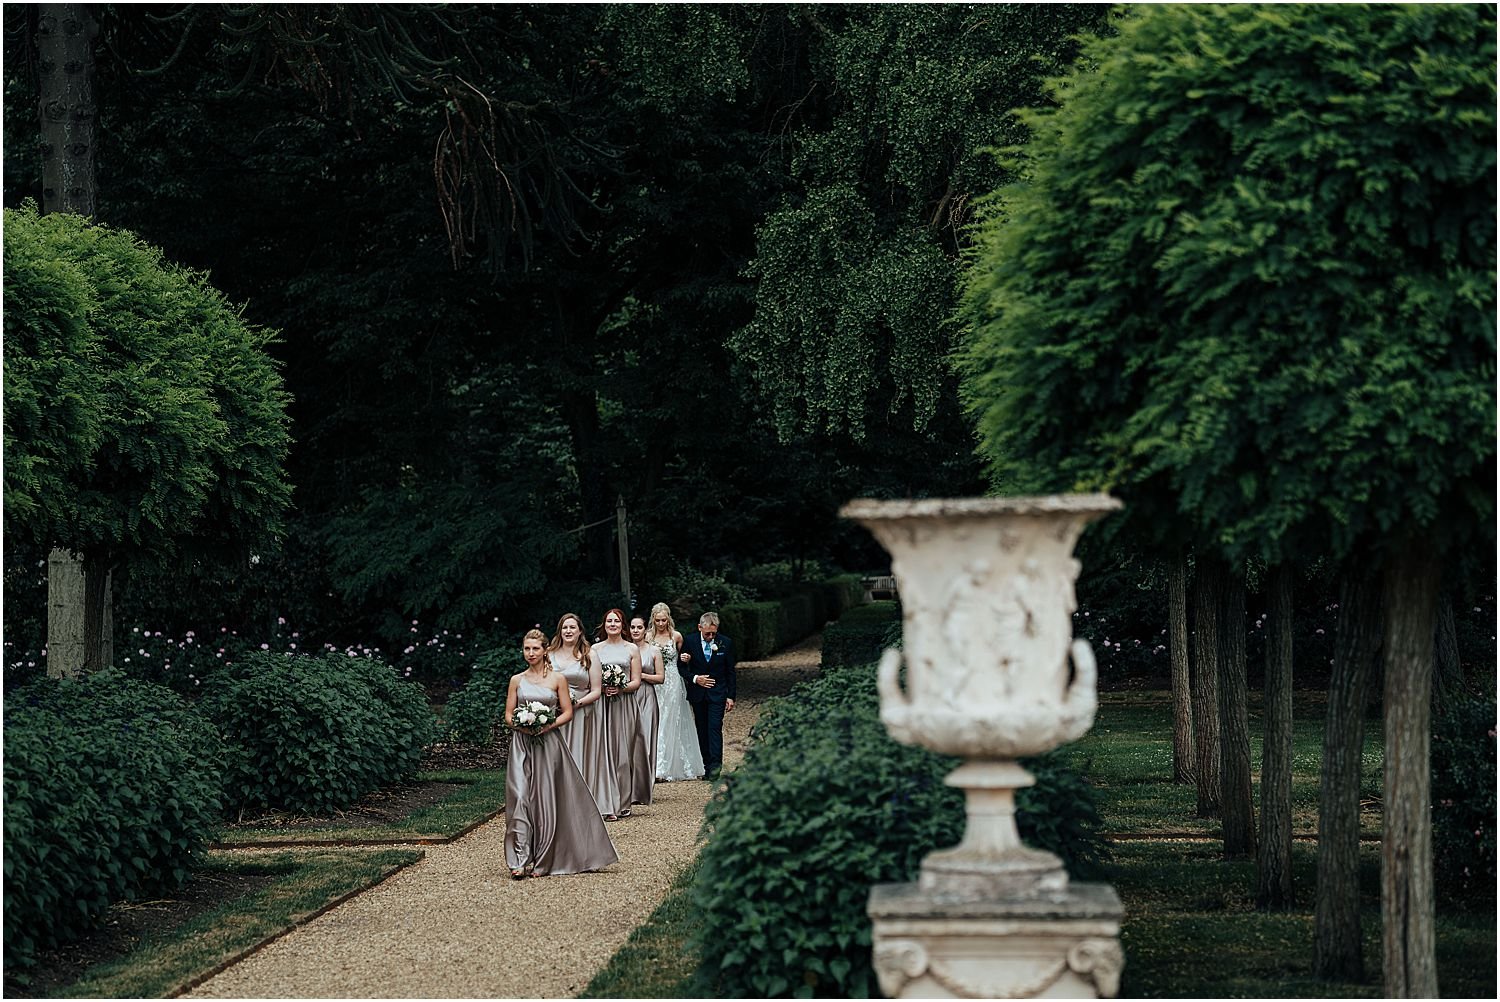 Bridal party arriving for wedding ceremony at Chiswick House